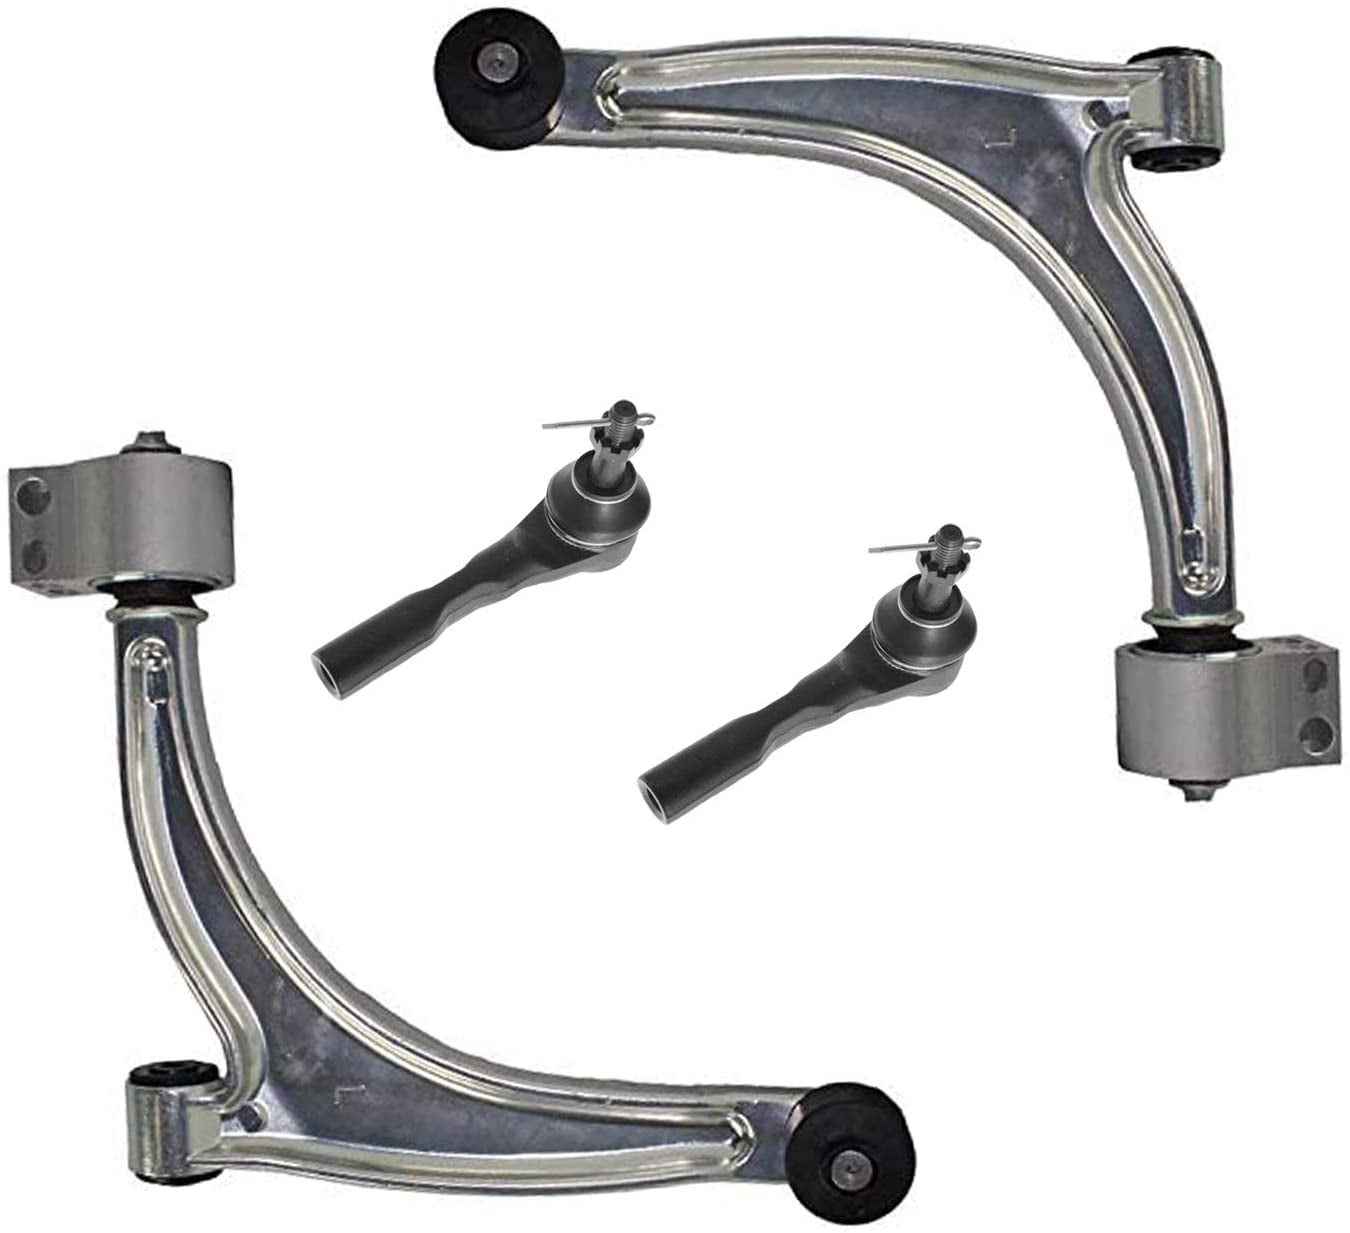 Ball Joints Kit/Set 2004-2012 Fit Malibu G6 Aura New Front Lower Control Arms 